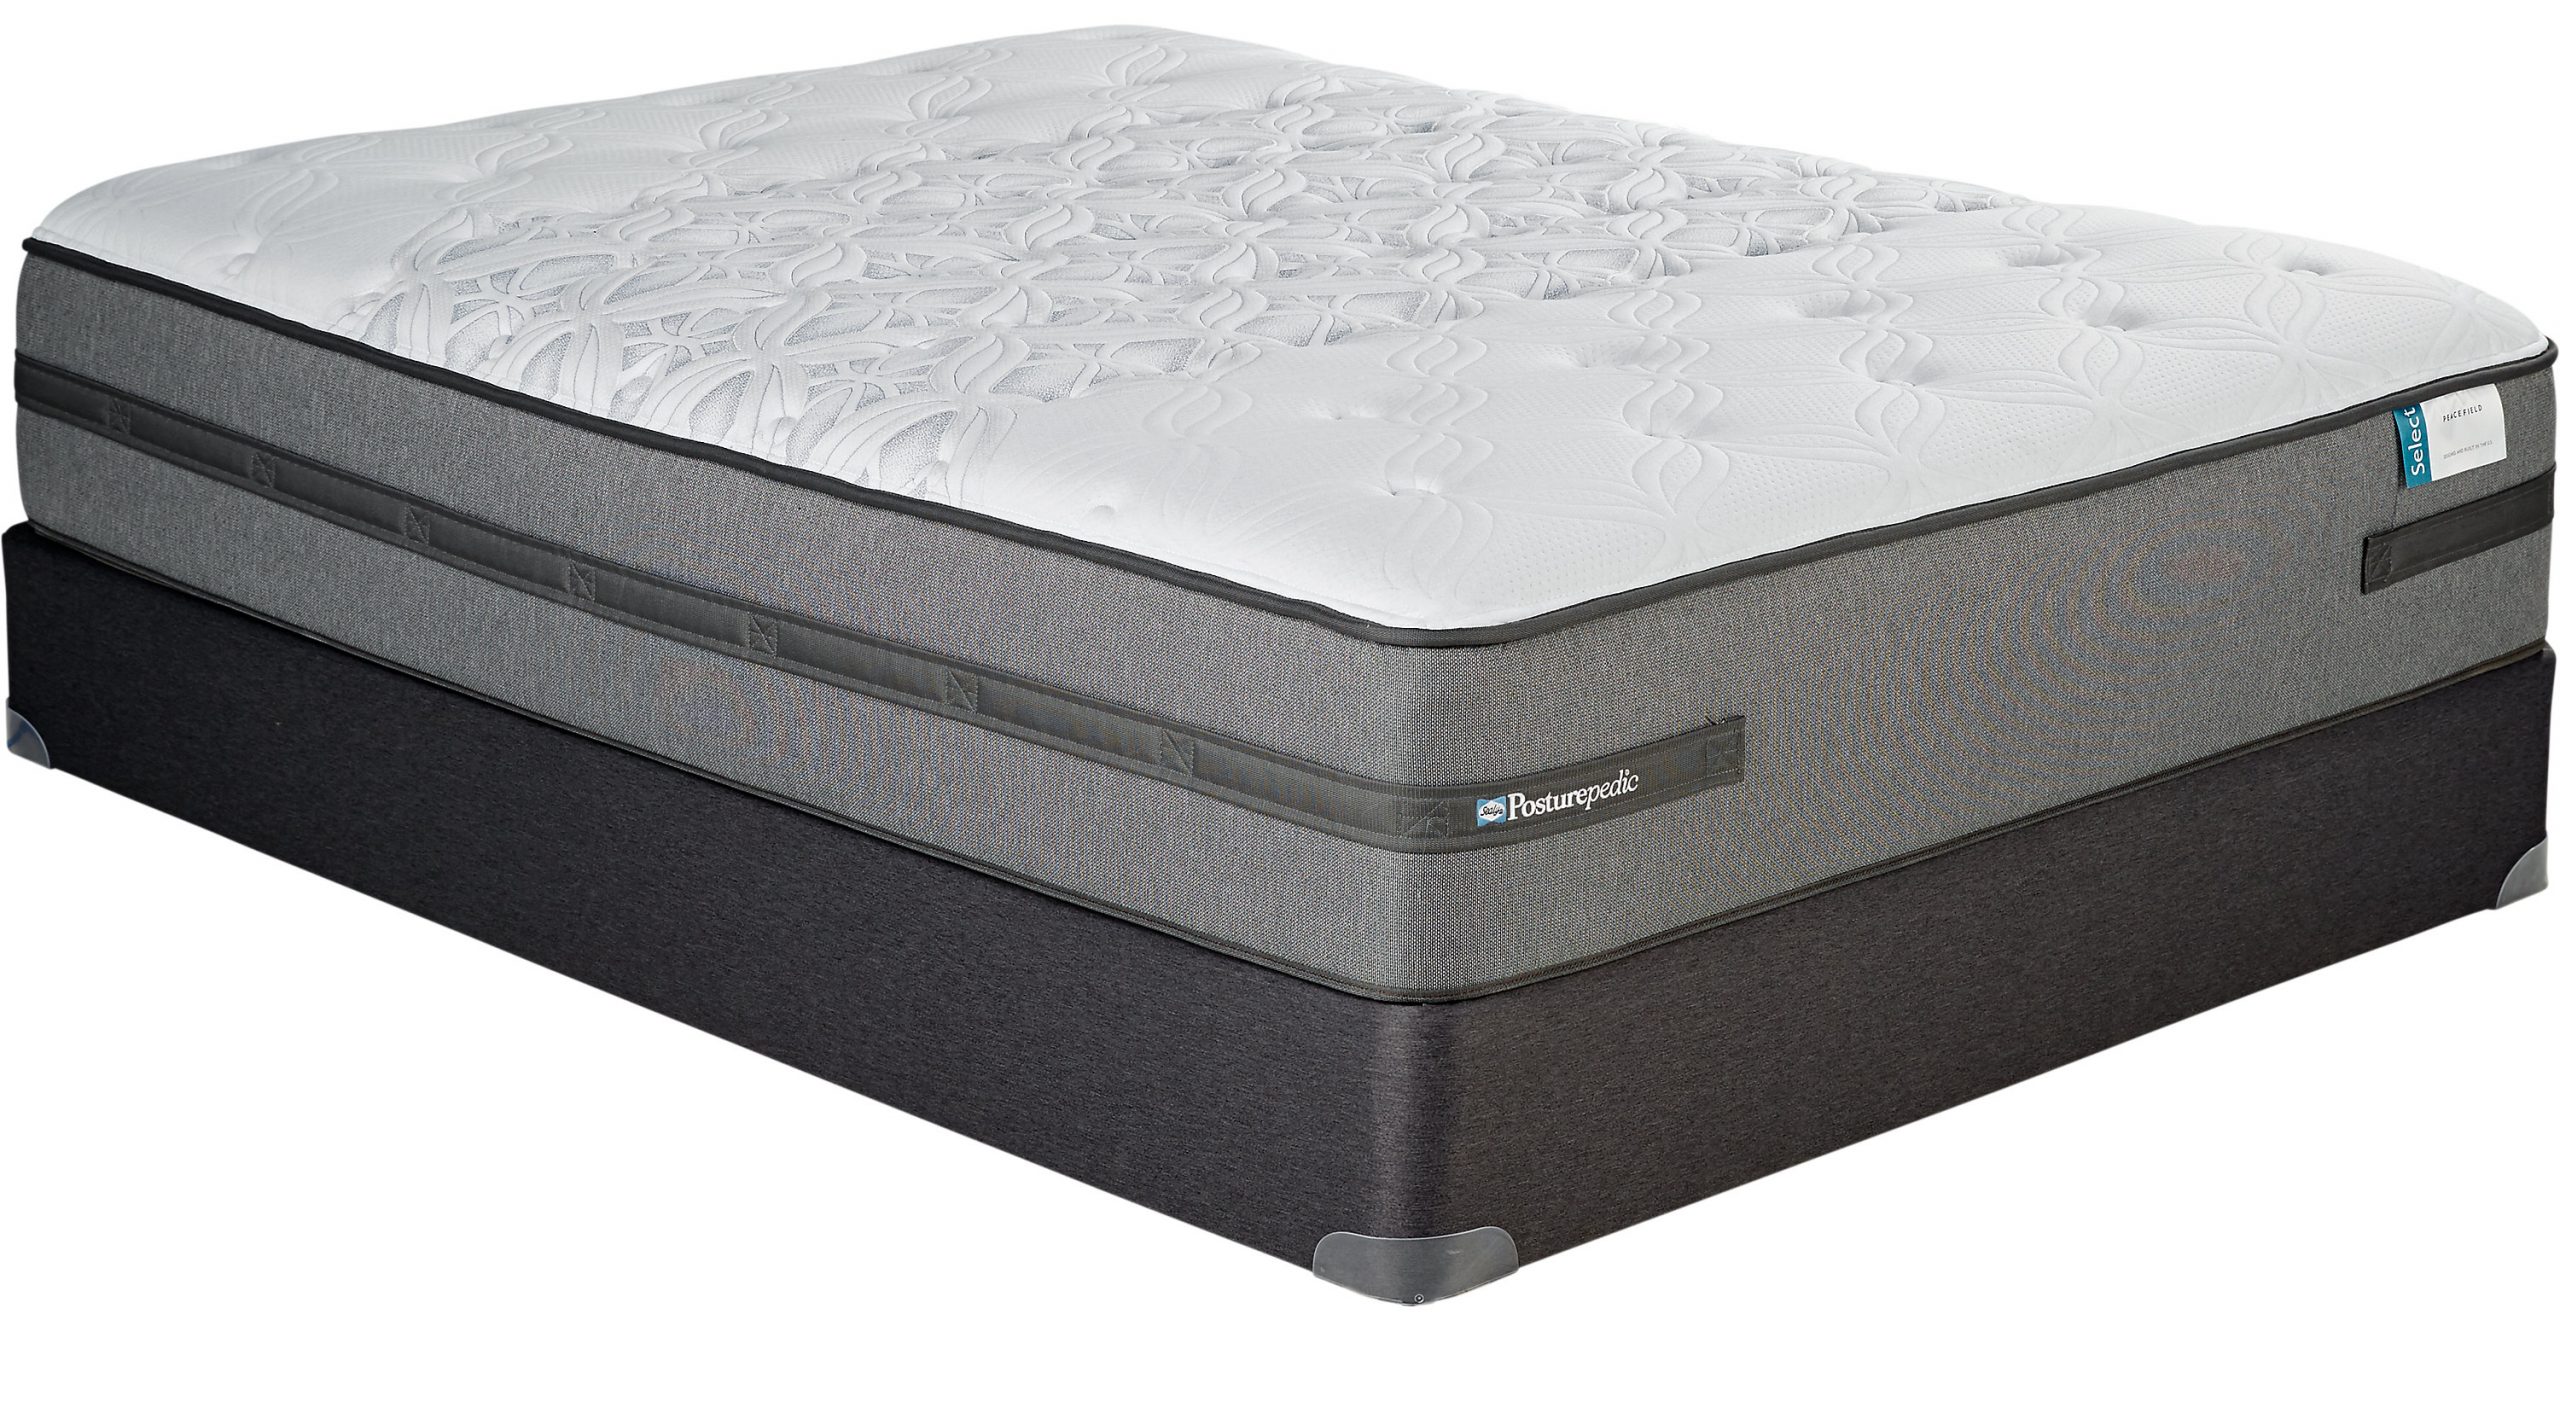 Sealy Posturepedic Select Hybrid Peacefield Queen Mattress Set